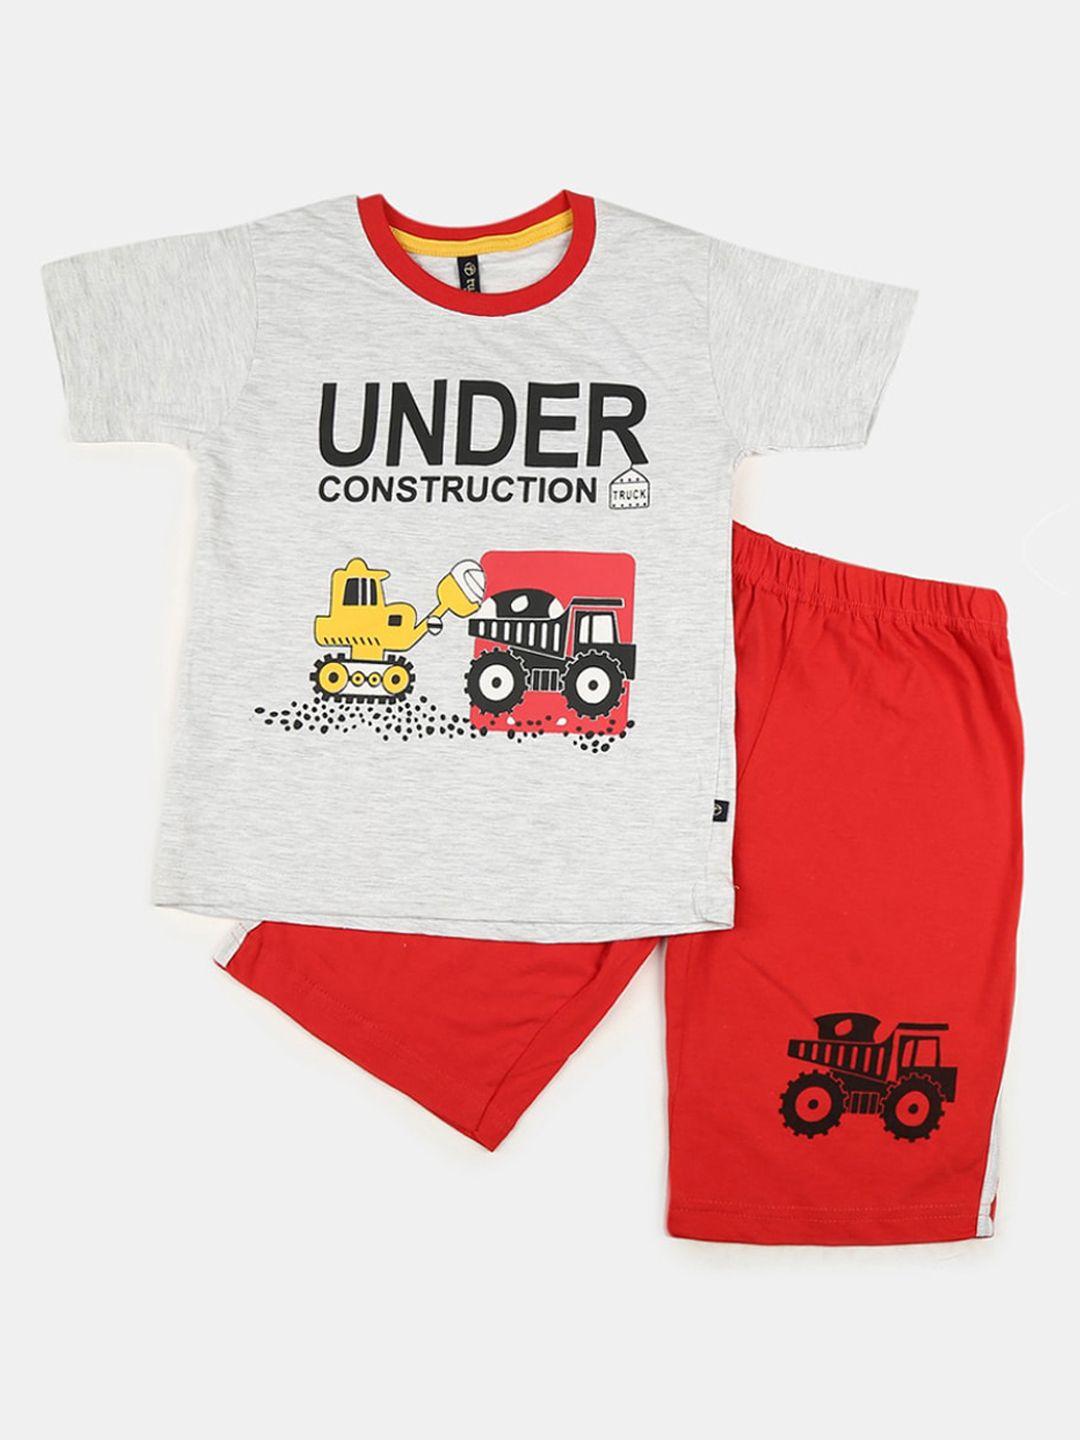 v-mart unisex kids grey & red printed pure cotton t-shirt with shorts